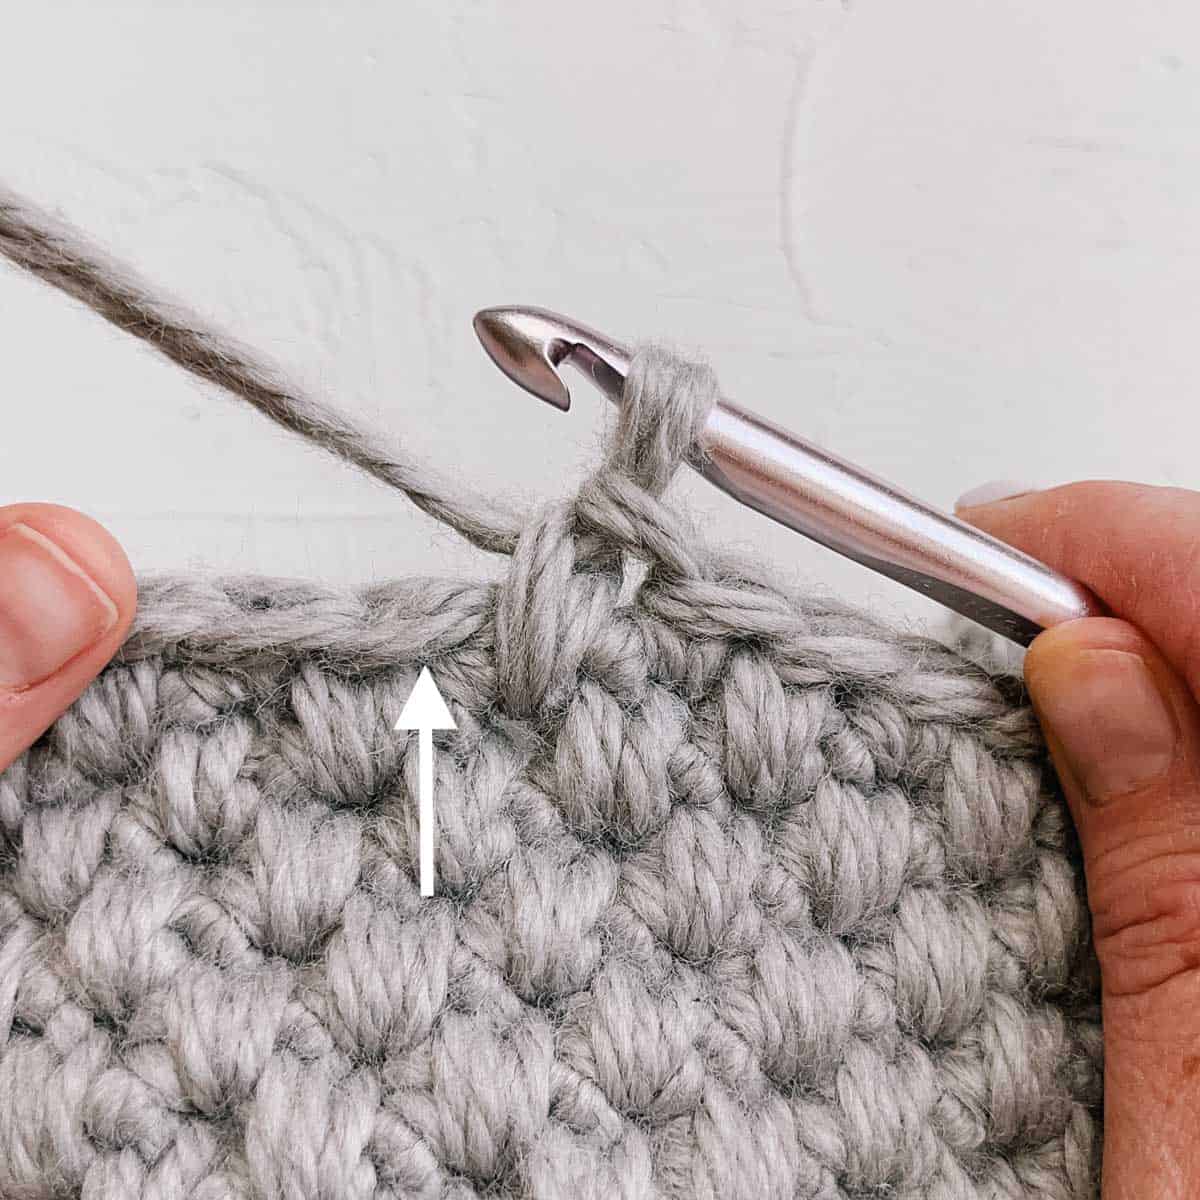 Spike stitch step 3: where to place the single crochet.